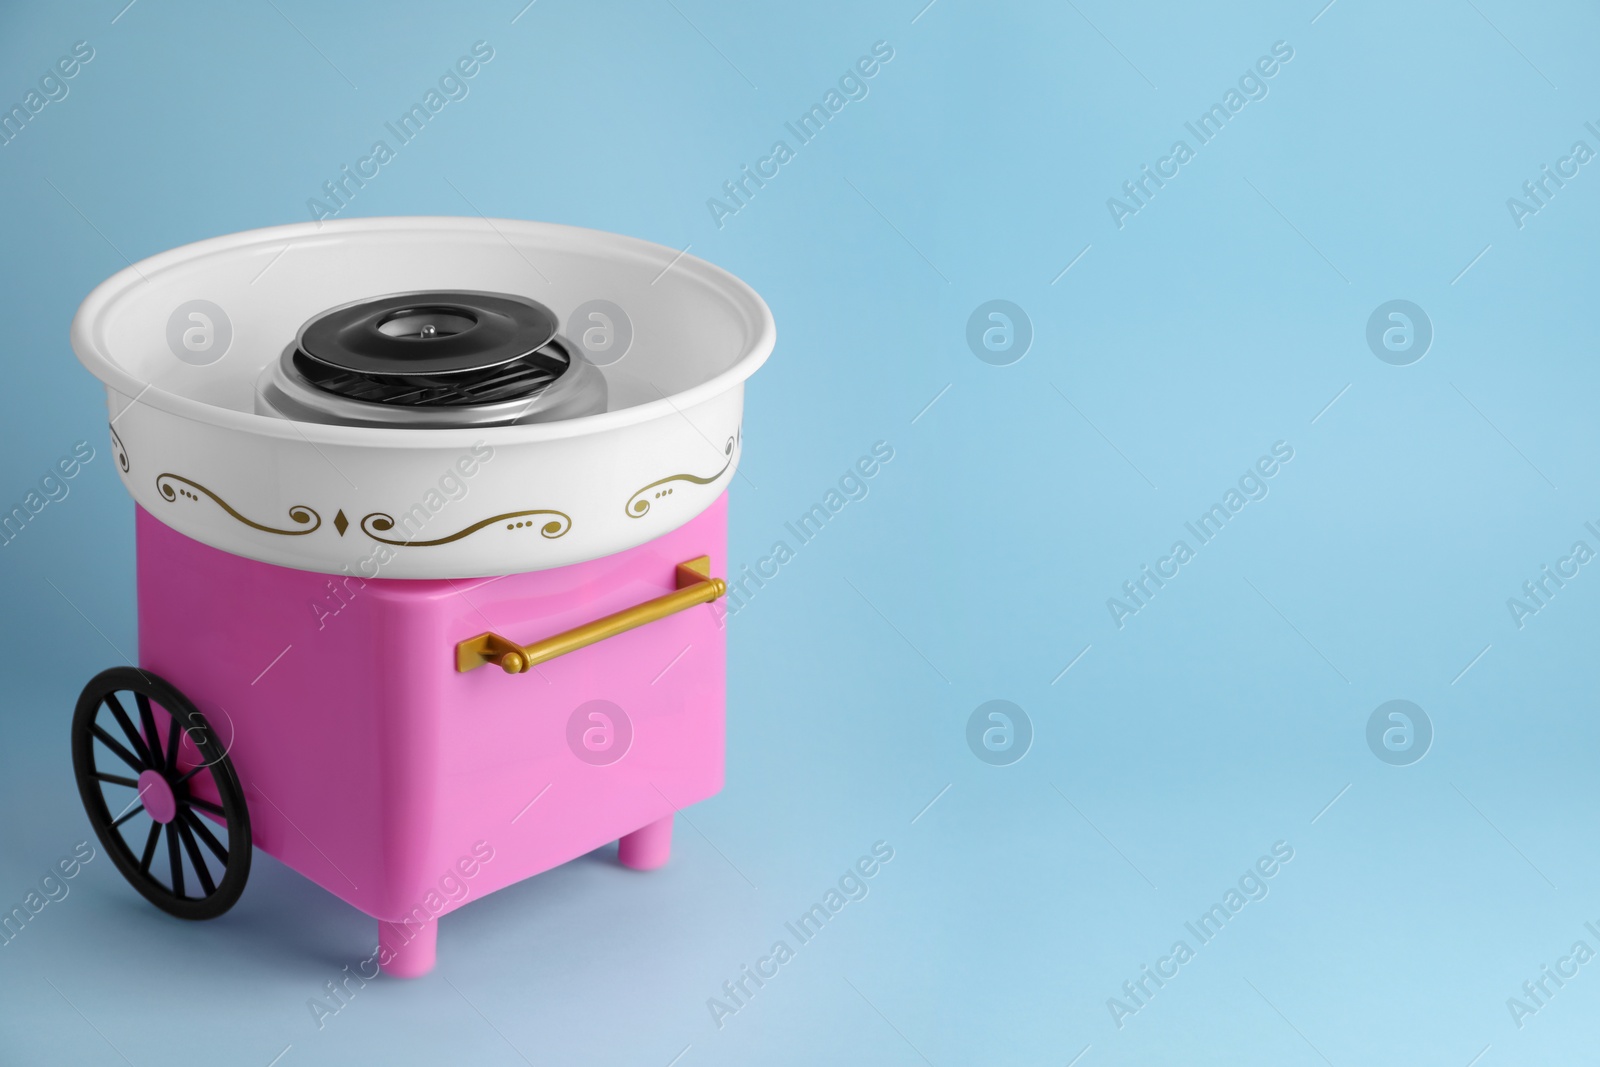 Photo of Portable candy cotton machine on light blue background, space for text